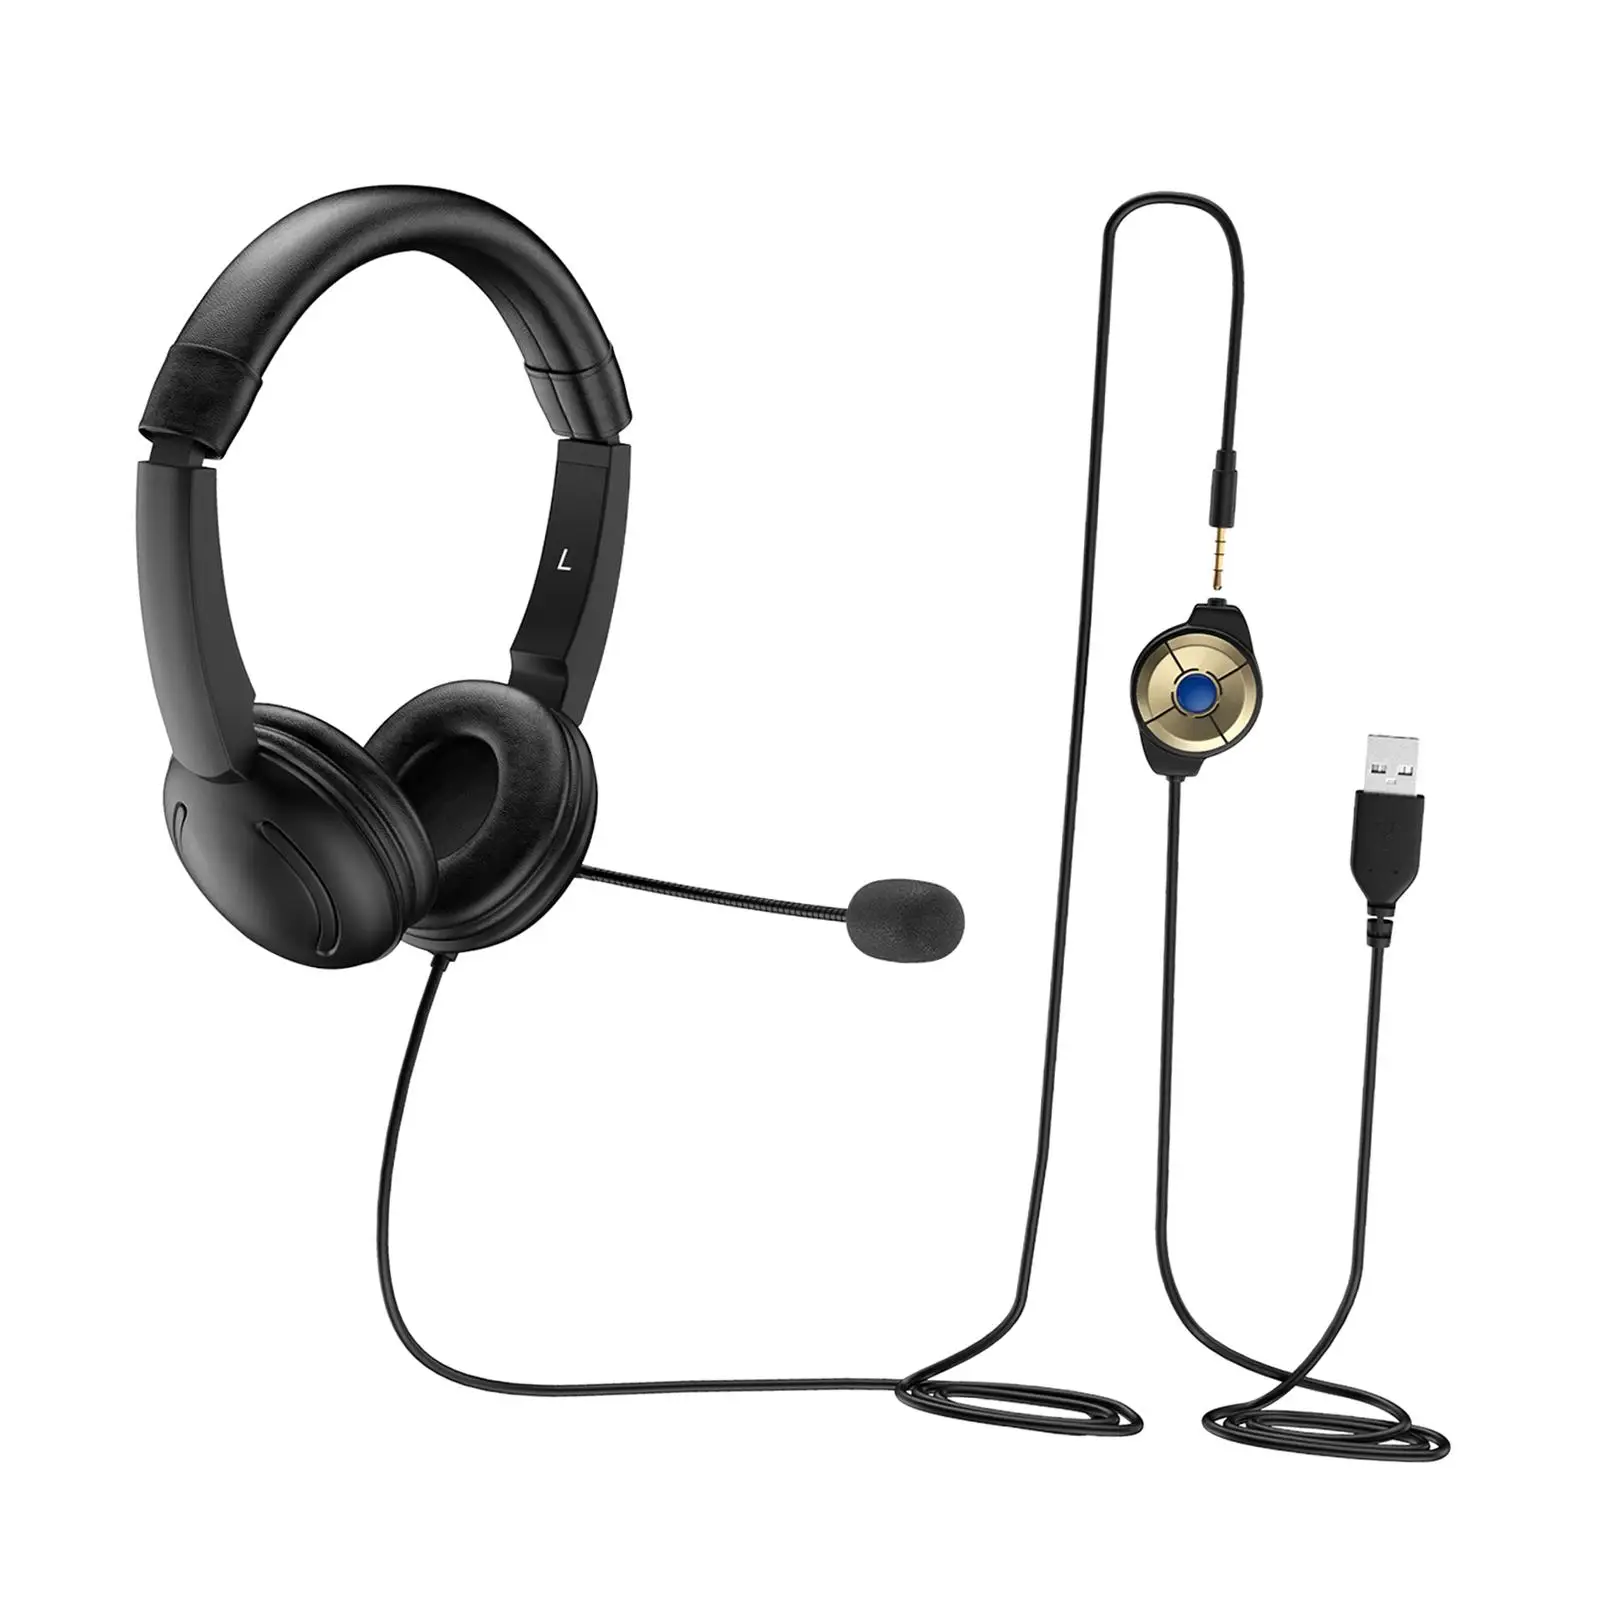 USB Headset Speaker with Noise Cancelling Microphone with in Line Controls Headphones for Gaming Video Meetings PC Music Laptop